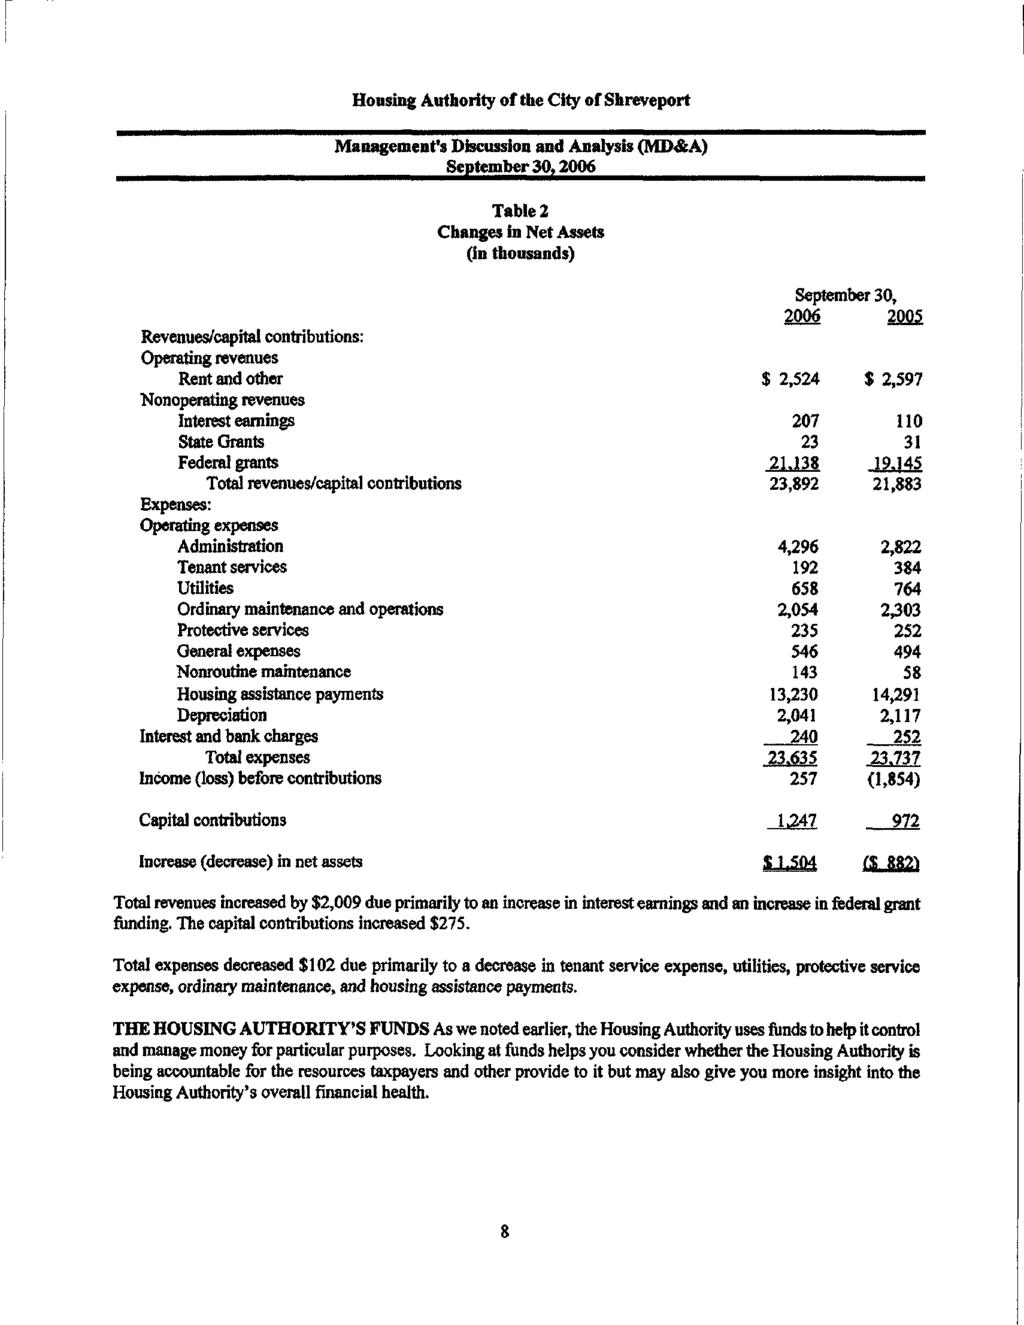 Housing Authority of the City of Shreveport Management's Discussion and Analysis (MD&A) September 3,26 Table 2 Changes in Net Assets (in thousands) Revenues/capital contributions: Operating revenues